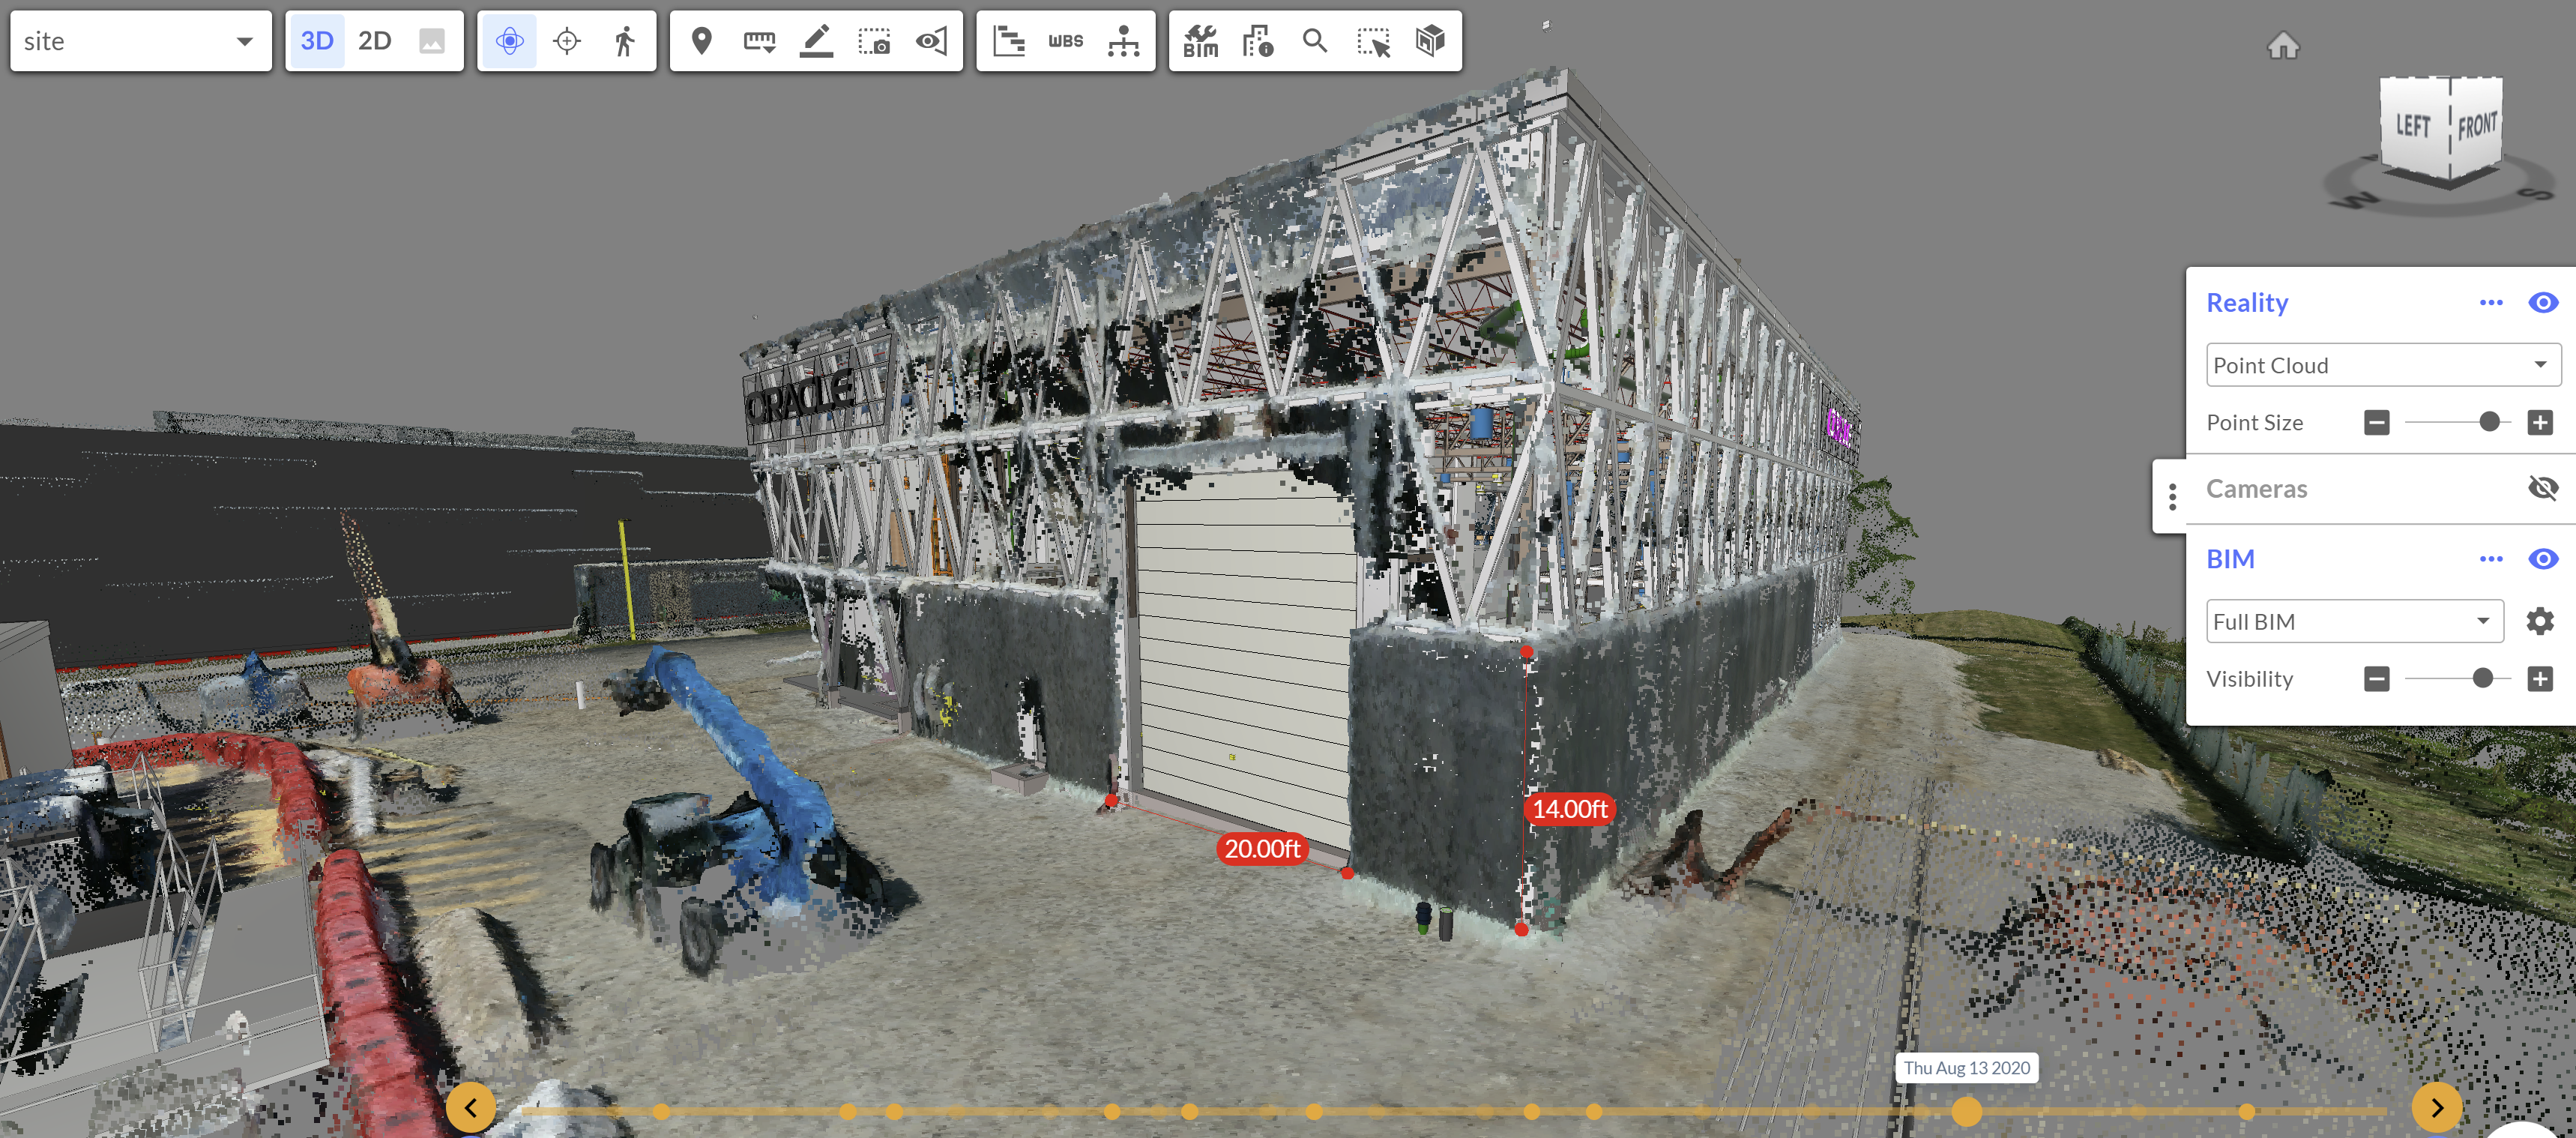 Oracle Lab 3D model in Reconstruct